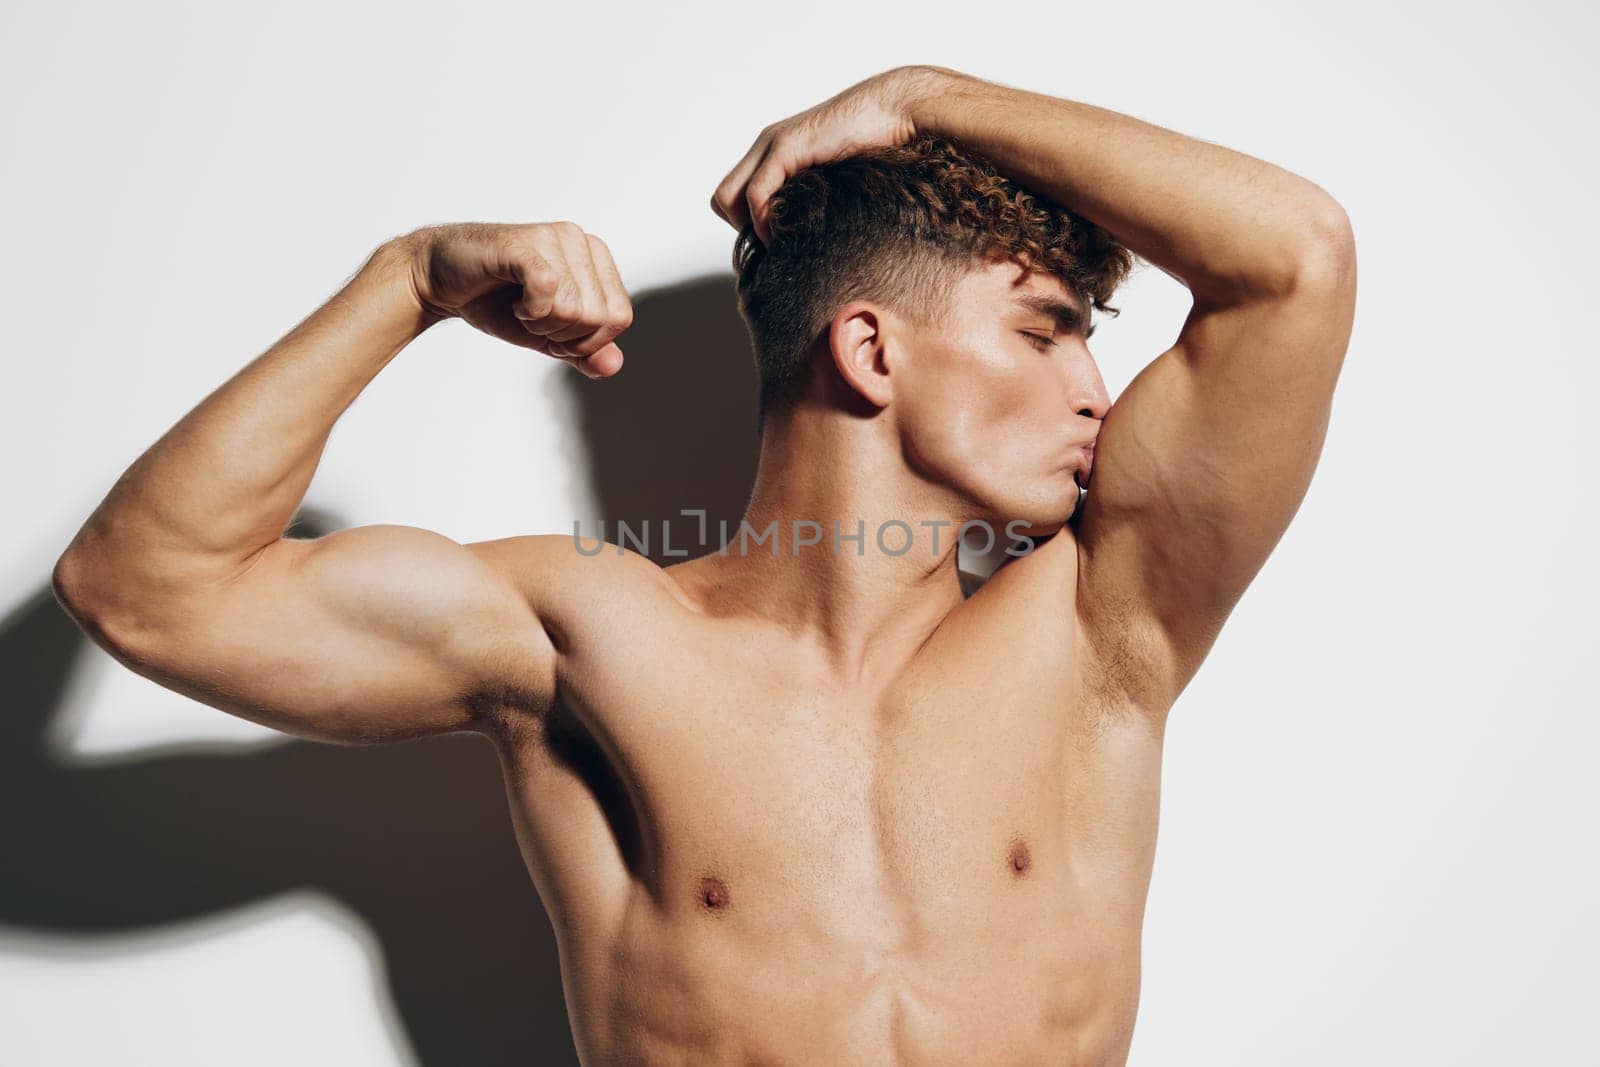 man athletic model gray background torso fit beauty gray handsome healthy studio standing male sport shirtless